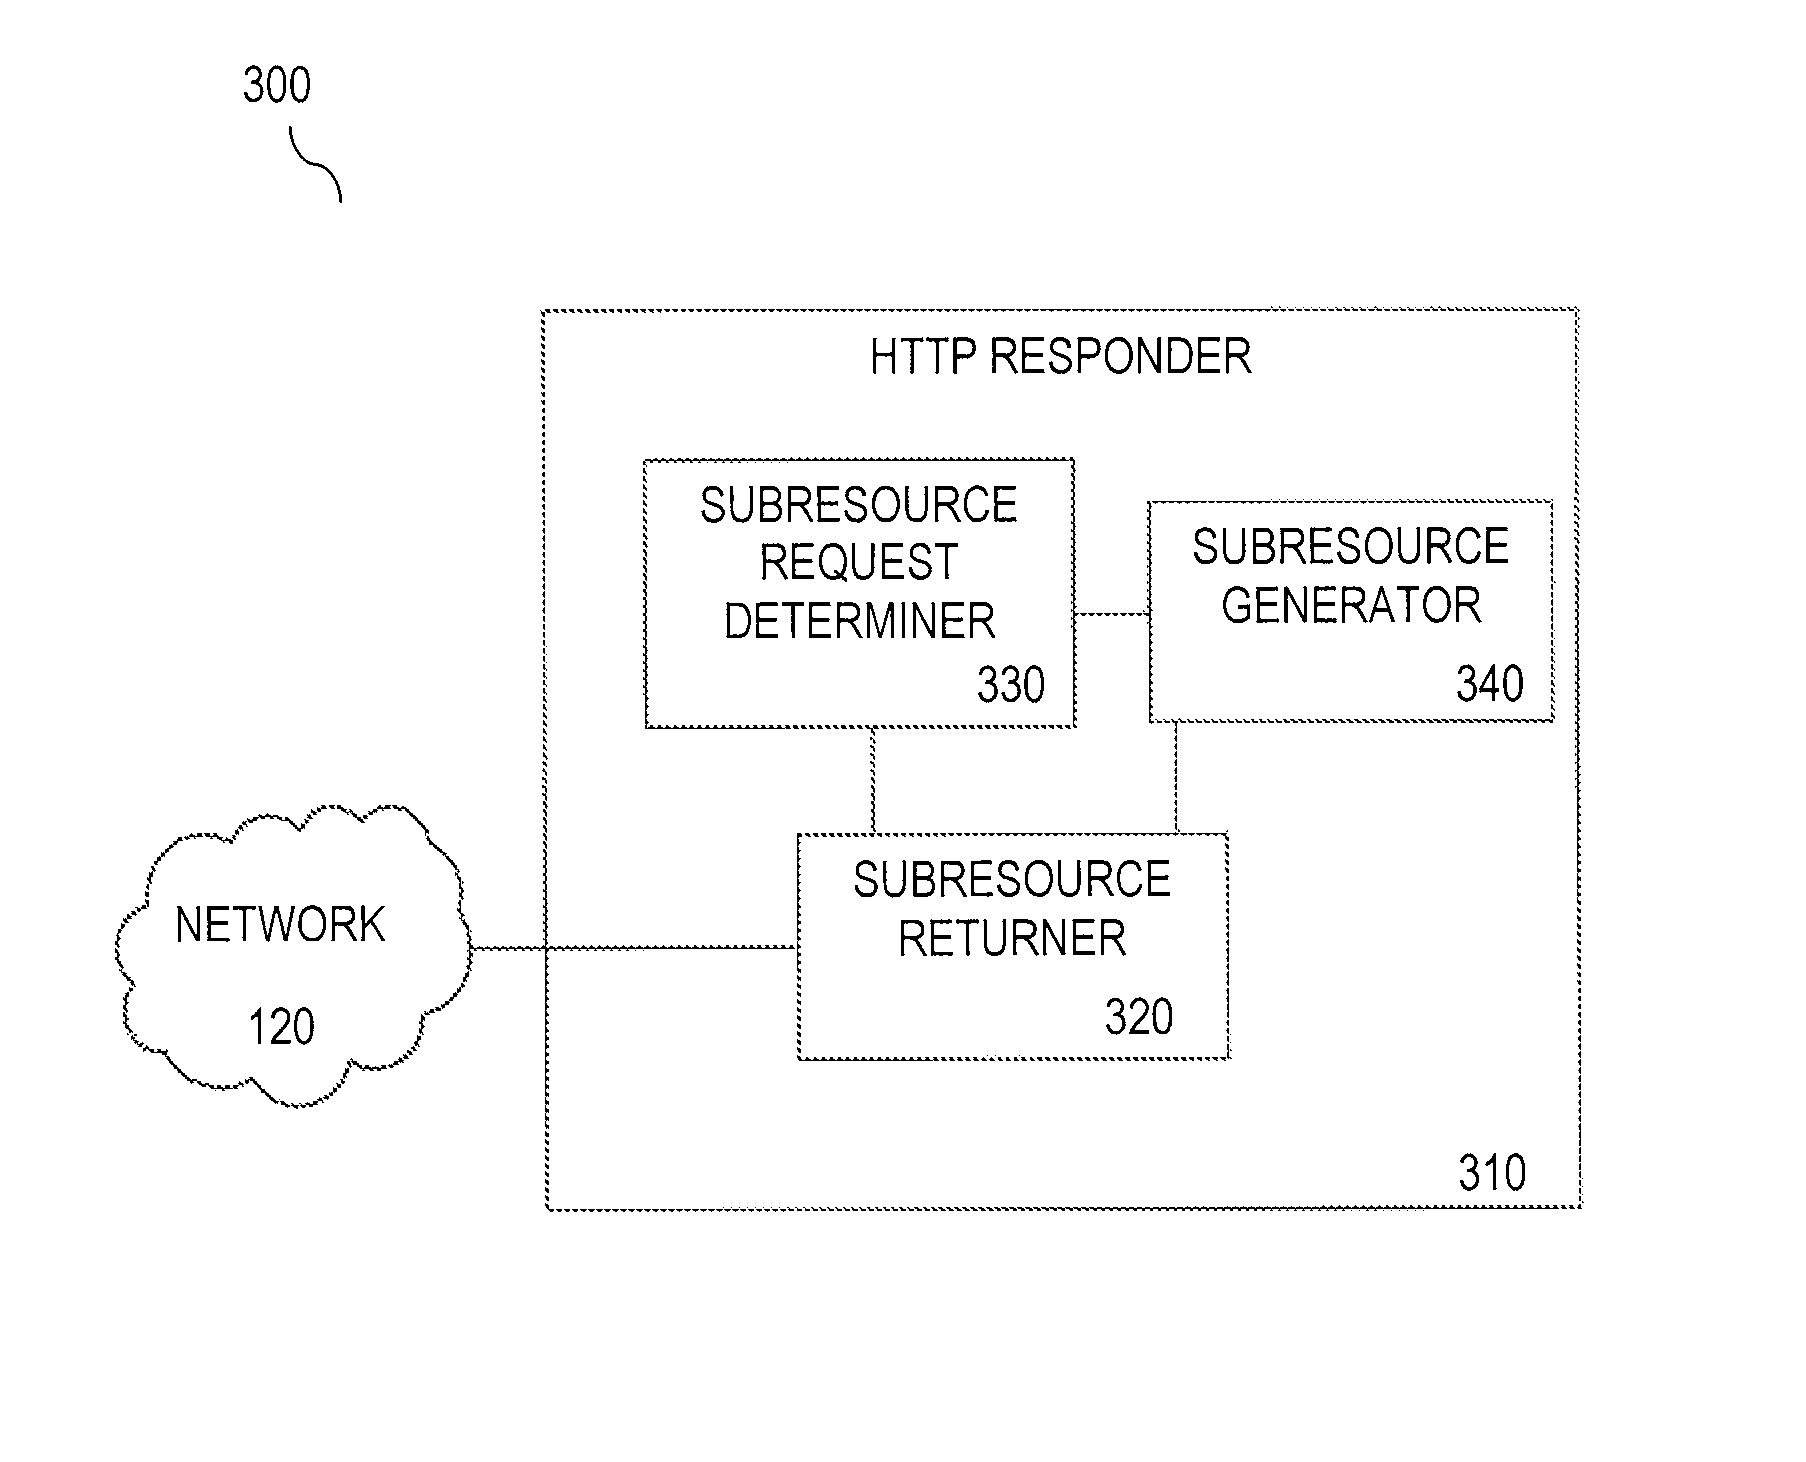 Reduced latency for subresource transfer